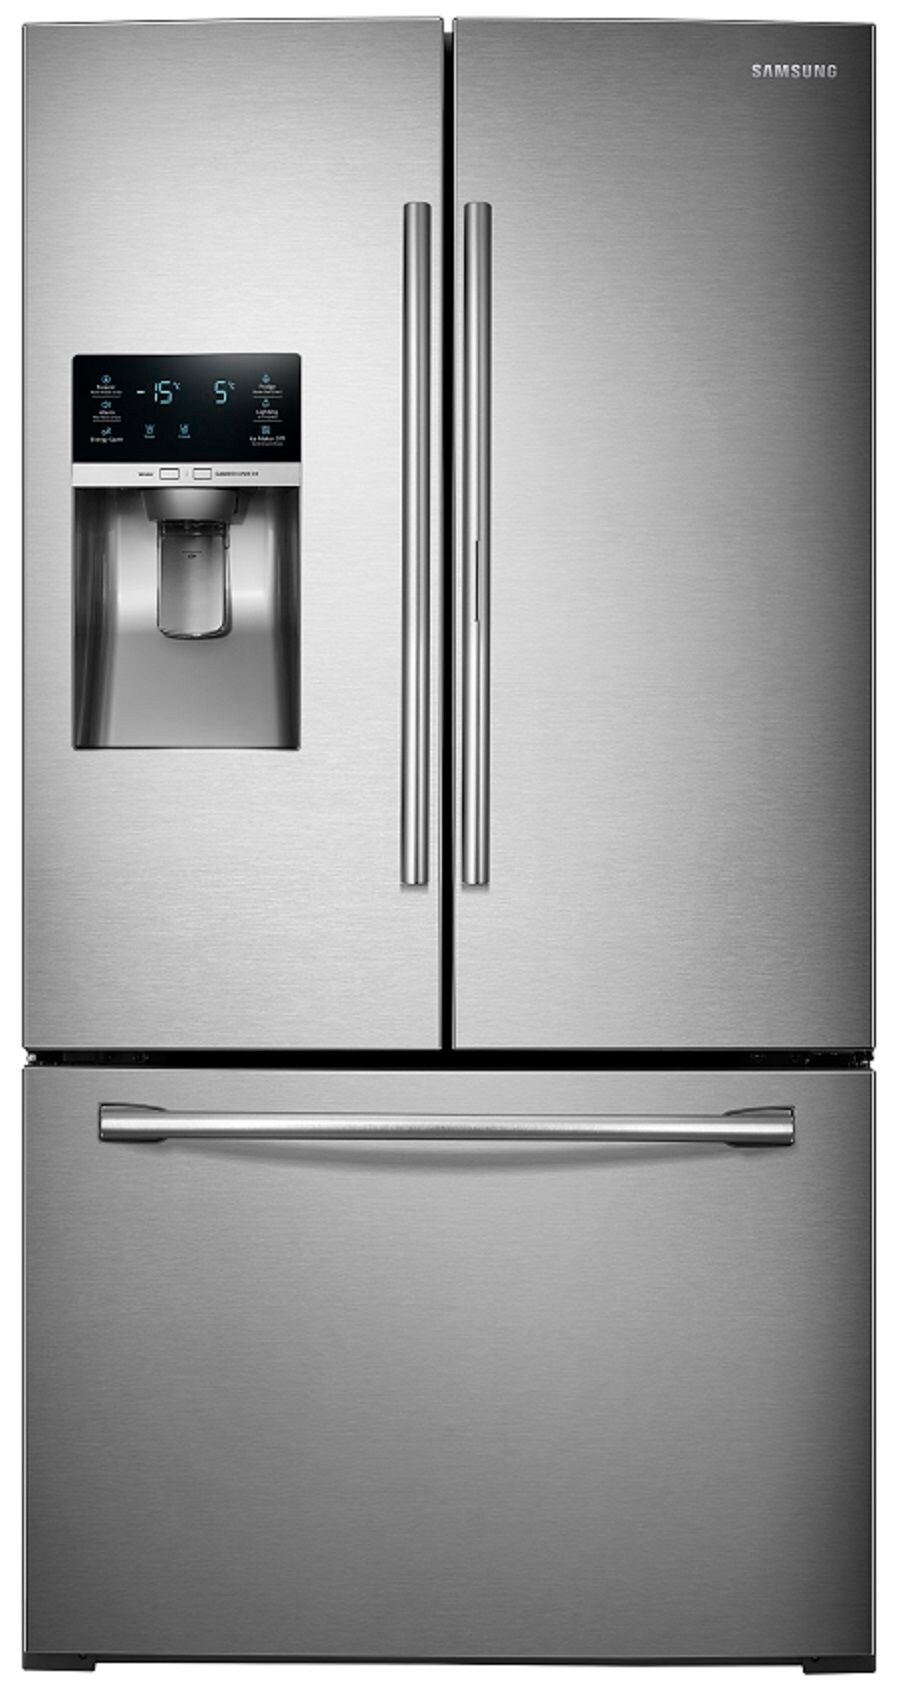 how to remove samsung ice maker french door